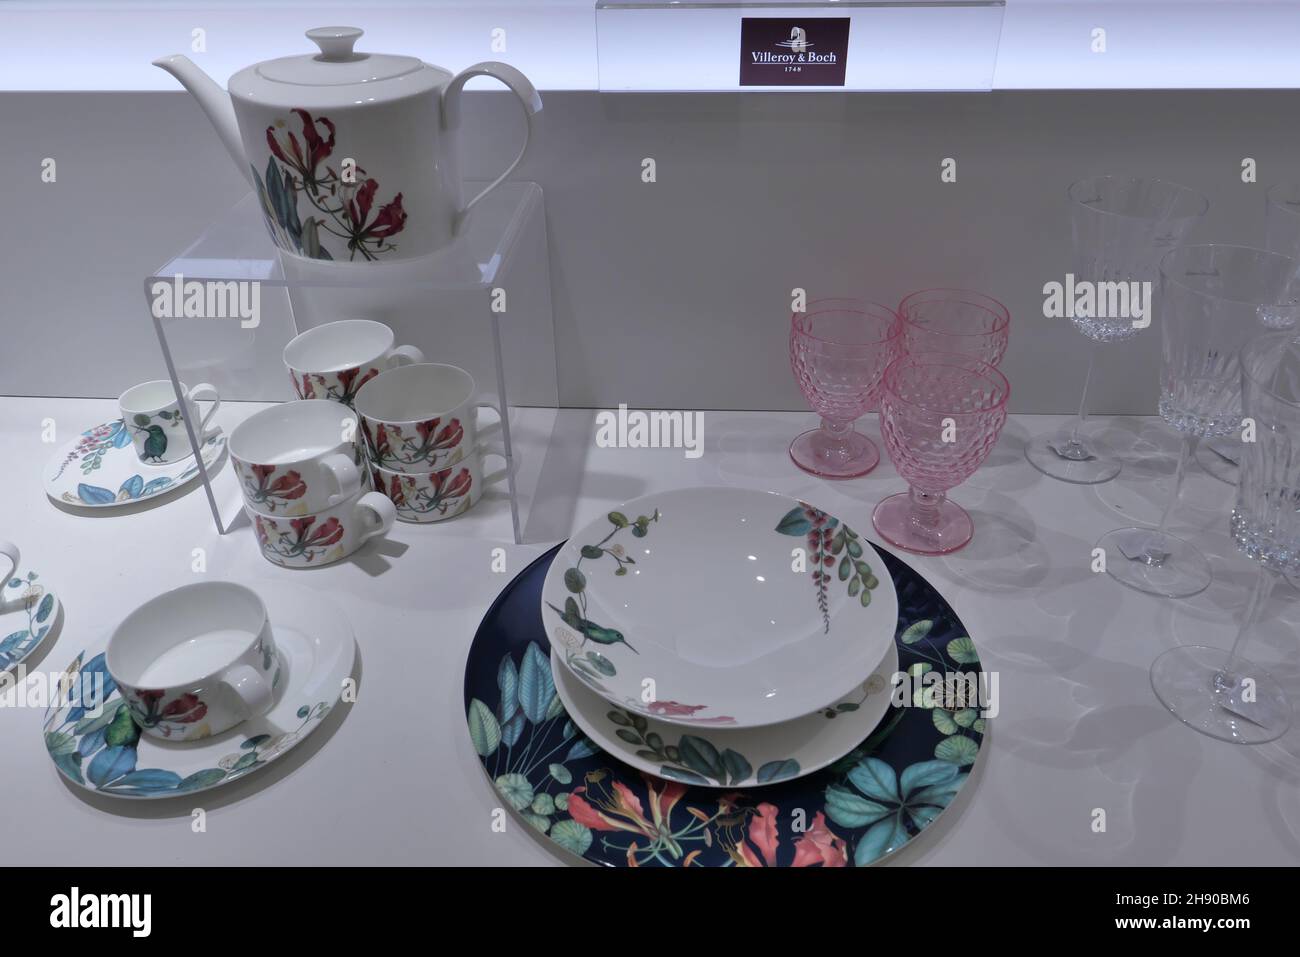 VILLEROY BOCH WHITE PORCELAIN PLATES AND CUPS ON DISPLAY INSIDE THE FASHION STORE Stock Photo